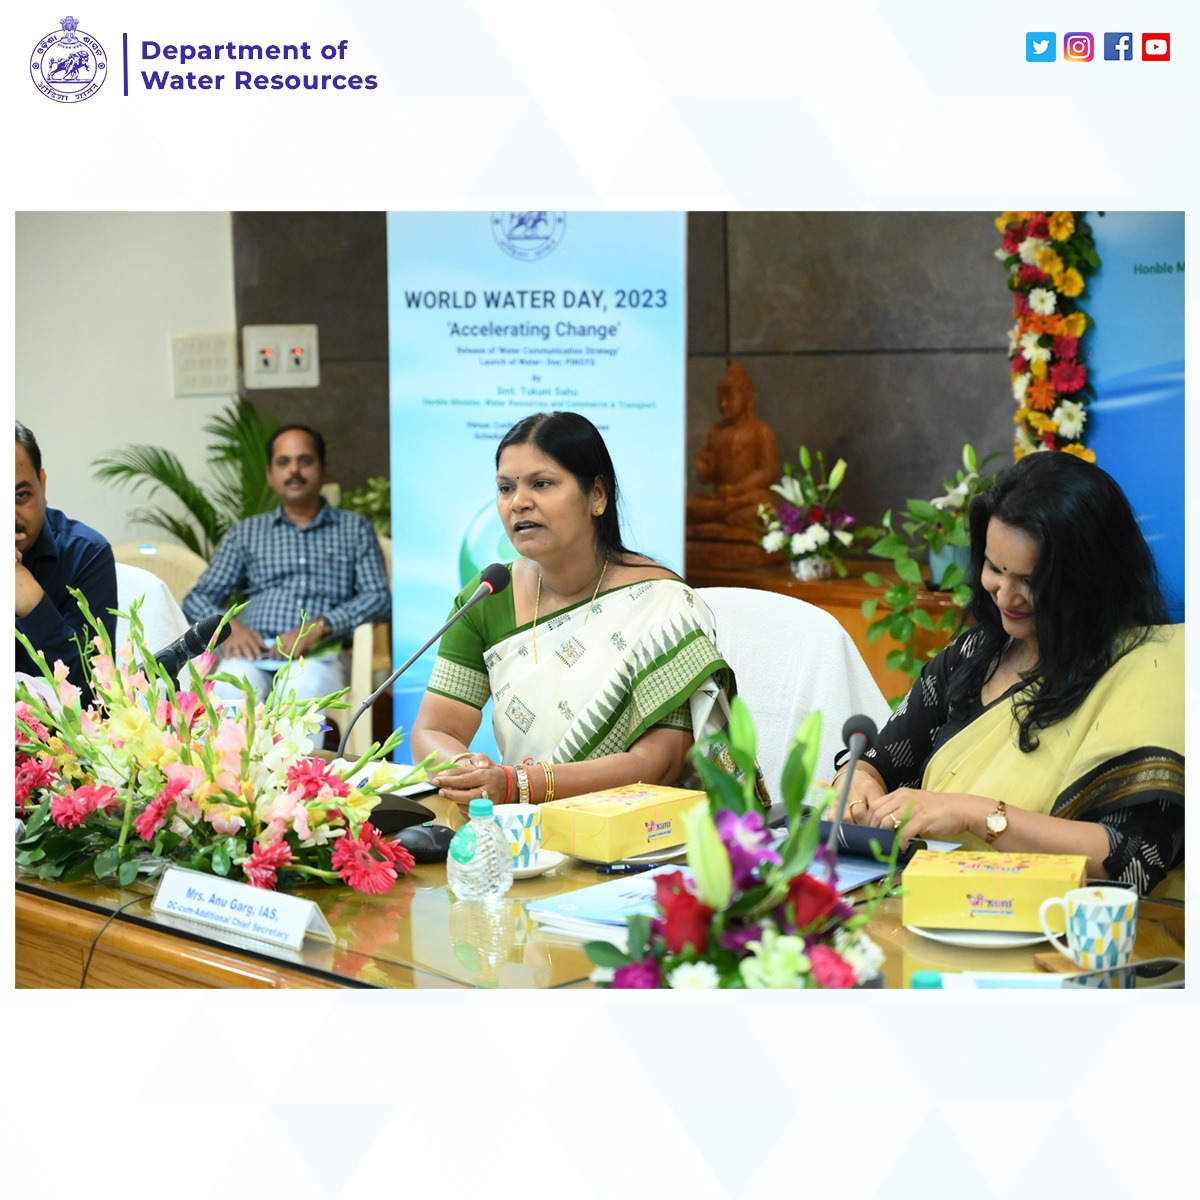 #WorldWaterDay2023, the Department of Water Resources observed the day with Hon'ble Minister, Water Resources & Commerce & Transport gracing the occasion. Let's work together towards a sustainable future for our most precious resource - water.💧🌊🌍 #WaterConservation